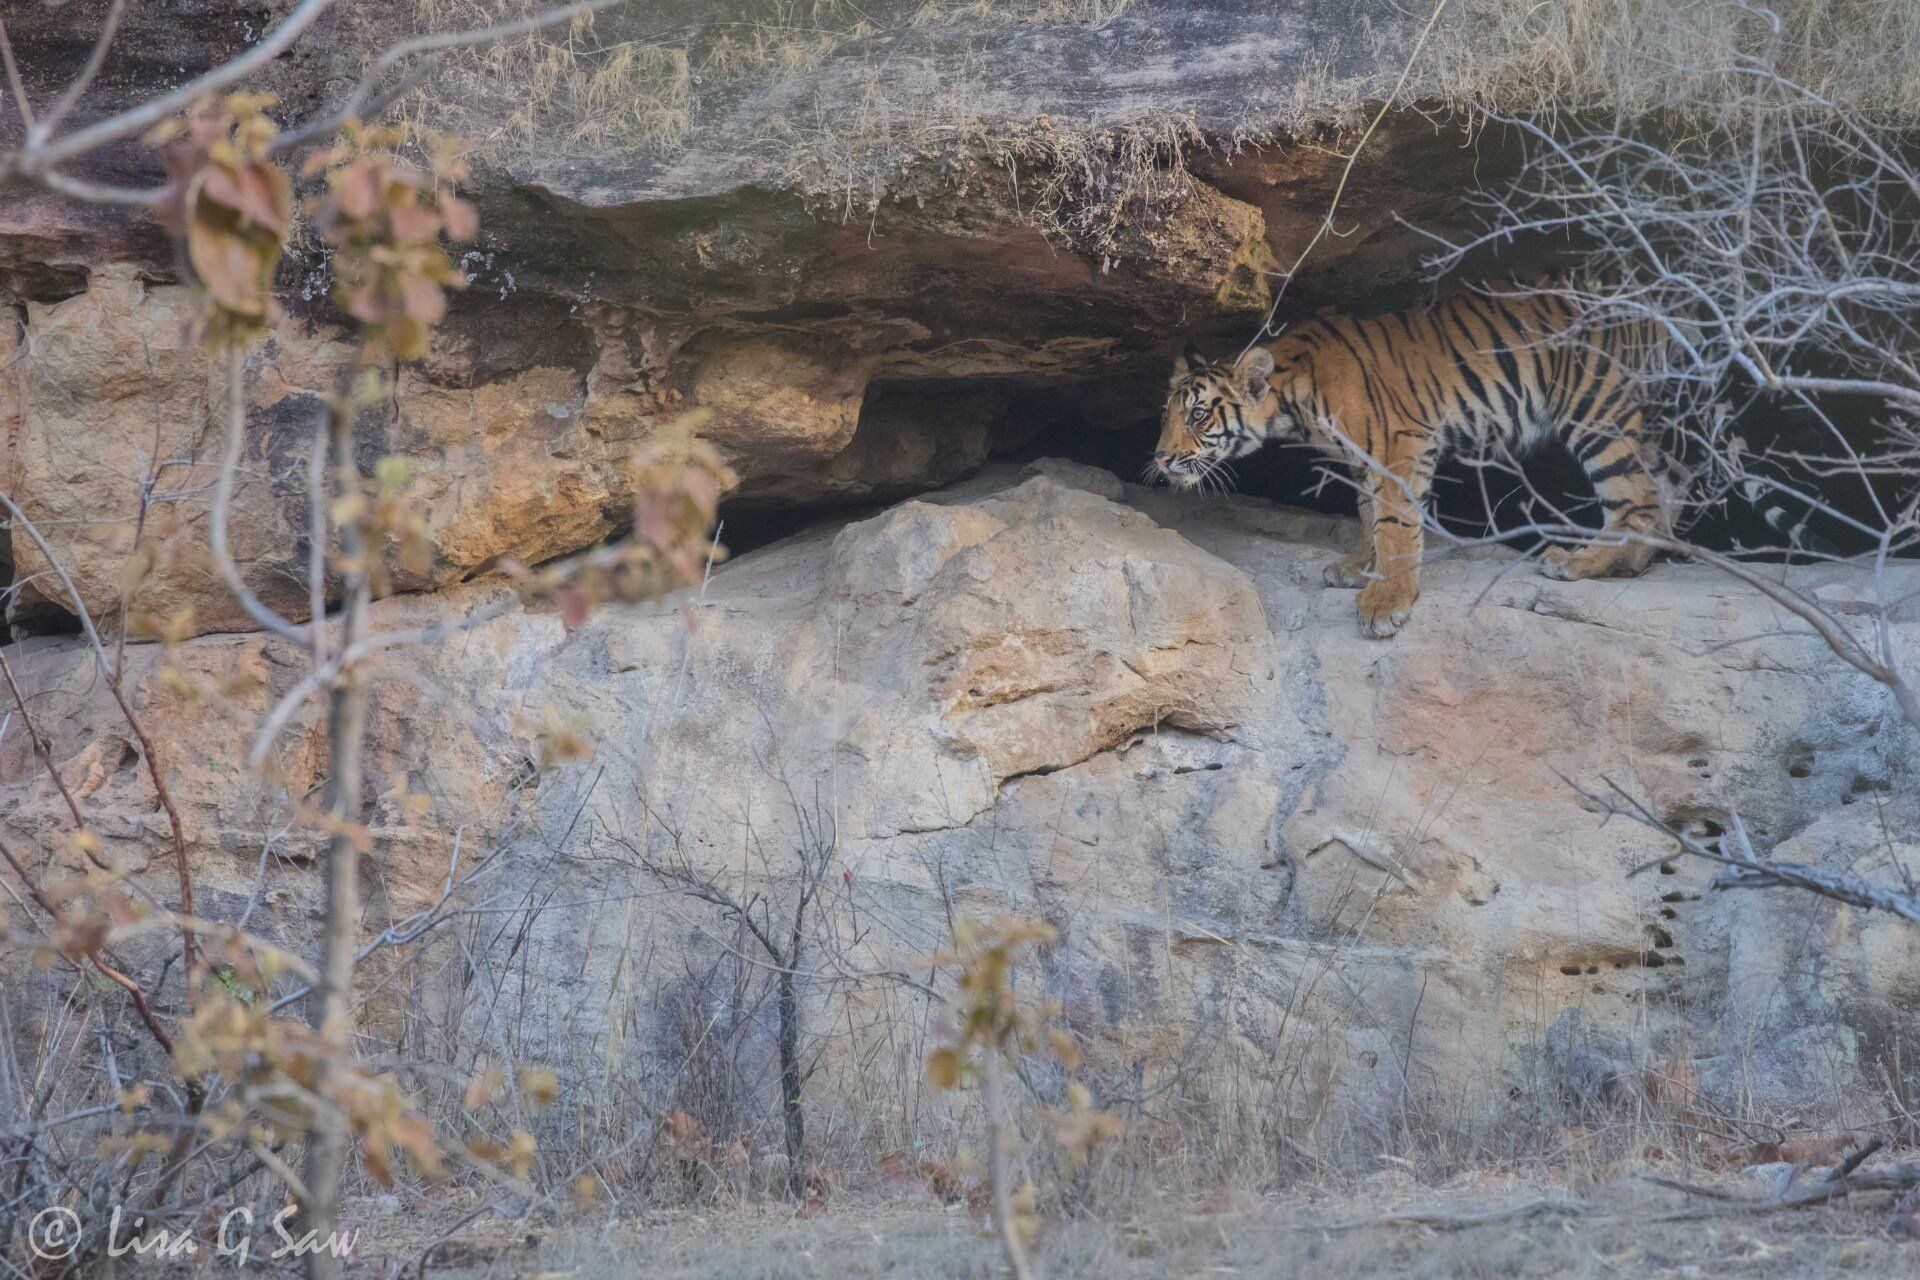 Young tiger emerging from cave in rocks